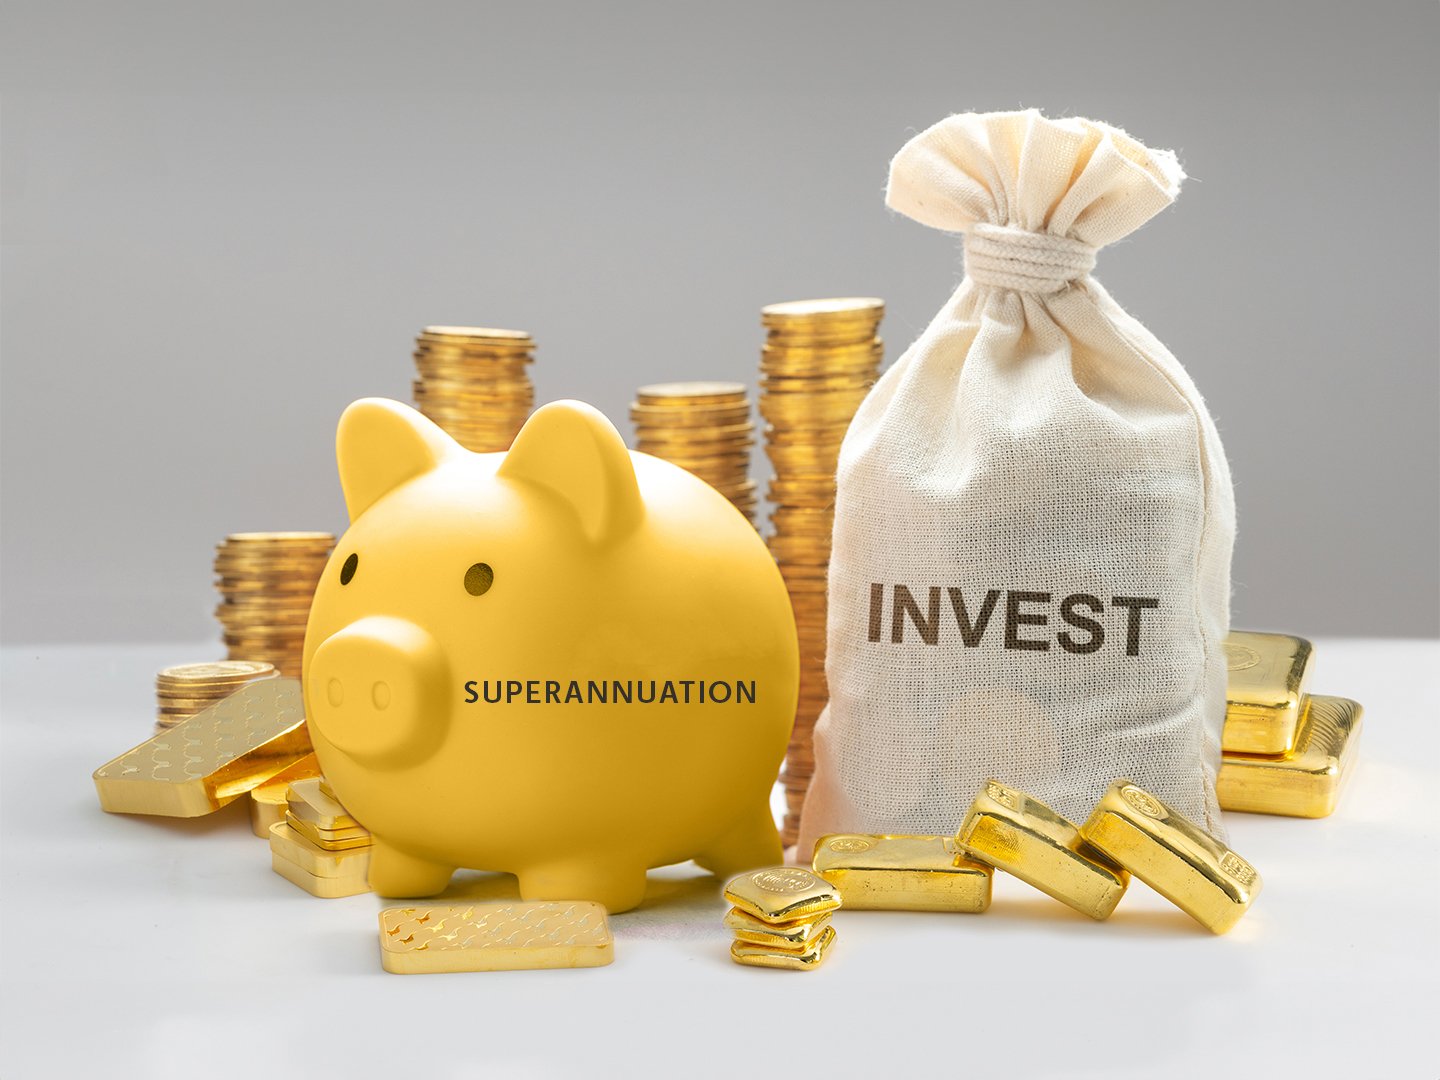 Superannuation and investing in gold